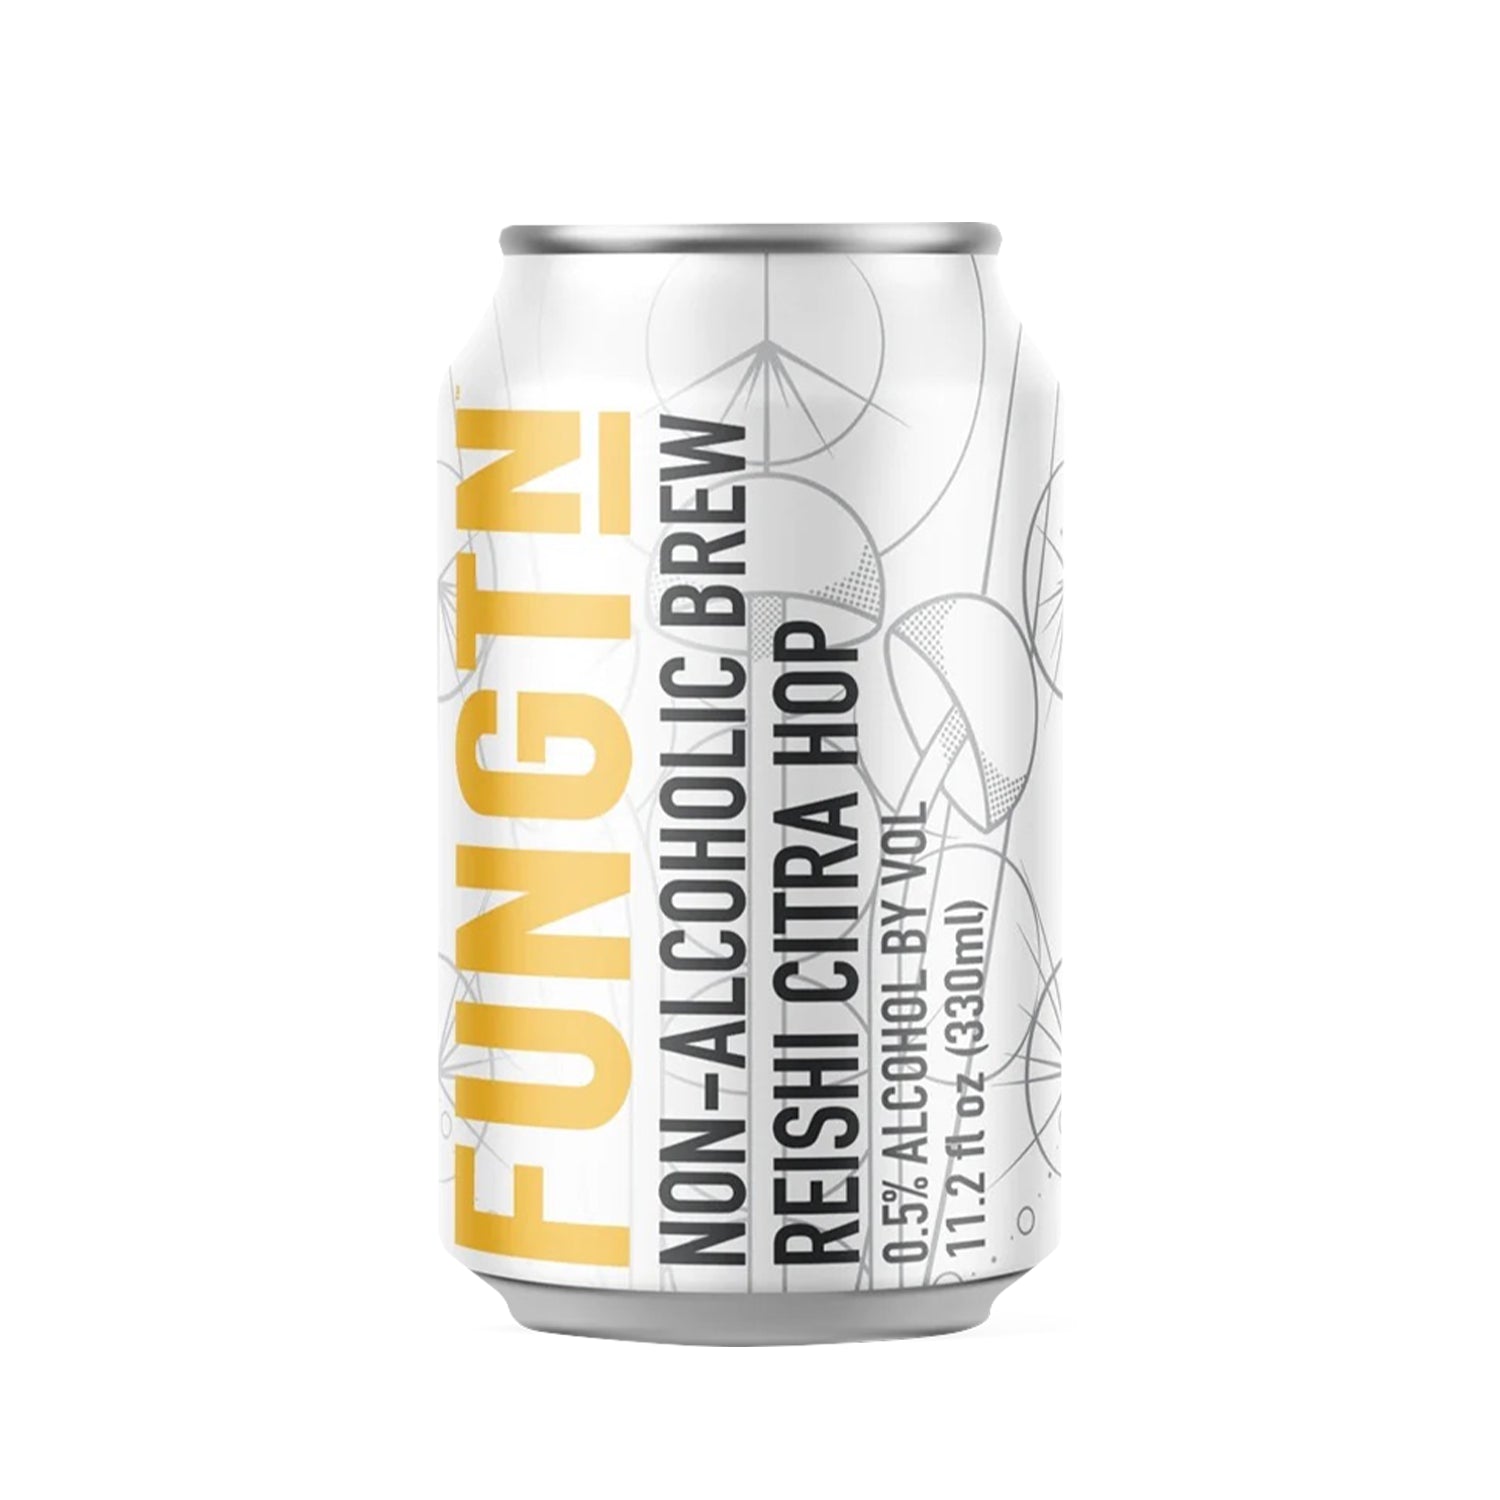 Fungtn Reishi Citra Hop - Non-Alcoholic Beer (6-Pack)